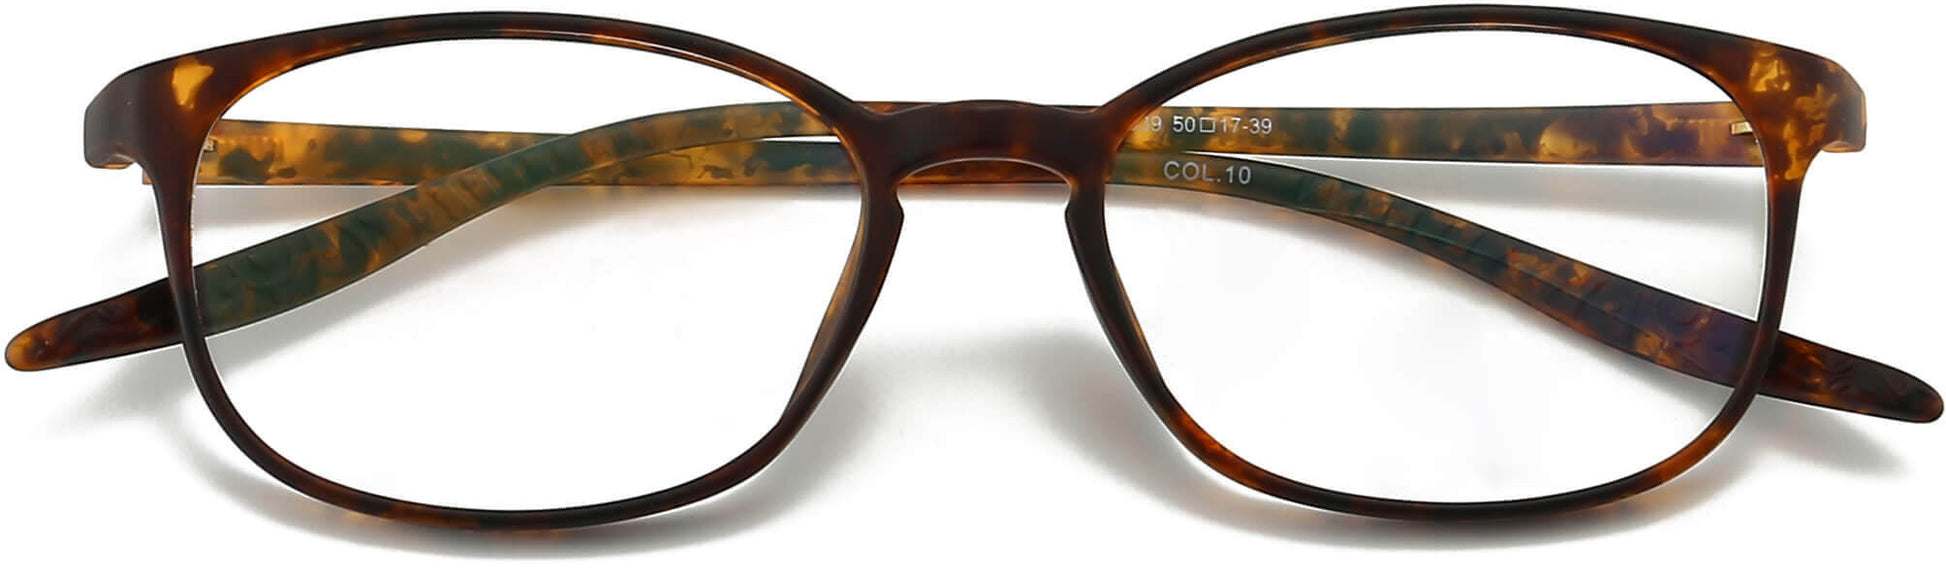 perrin-round-tortoise Eyeglasses from ANRRI, closed view